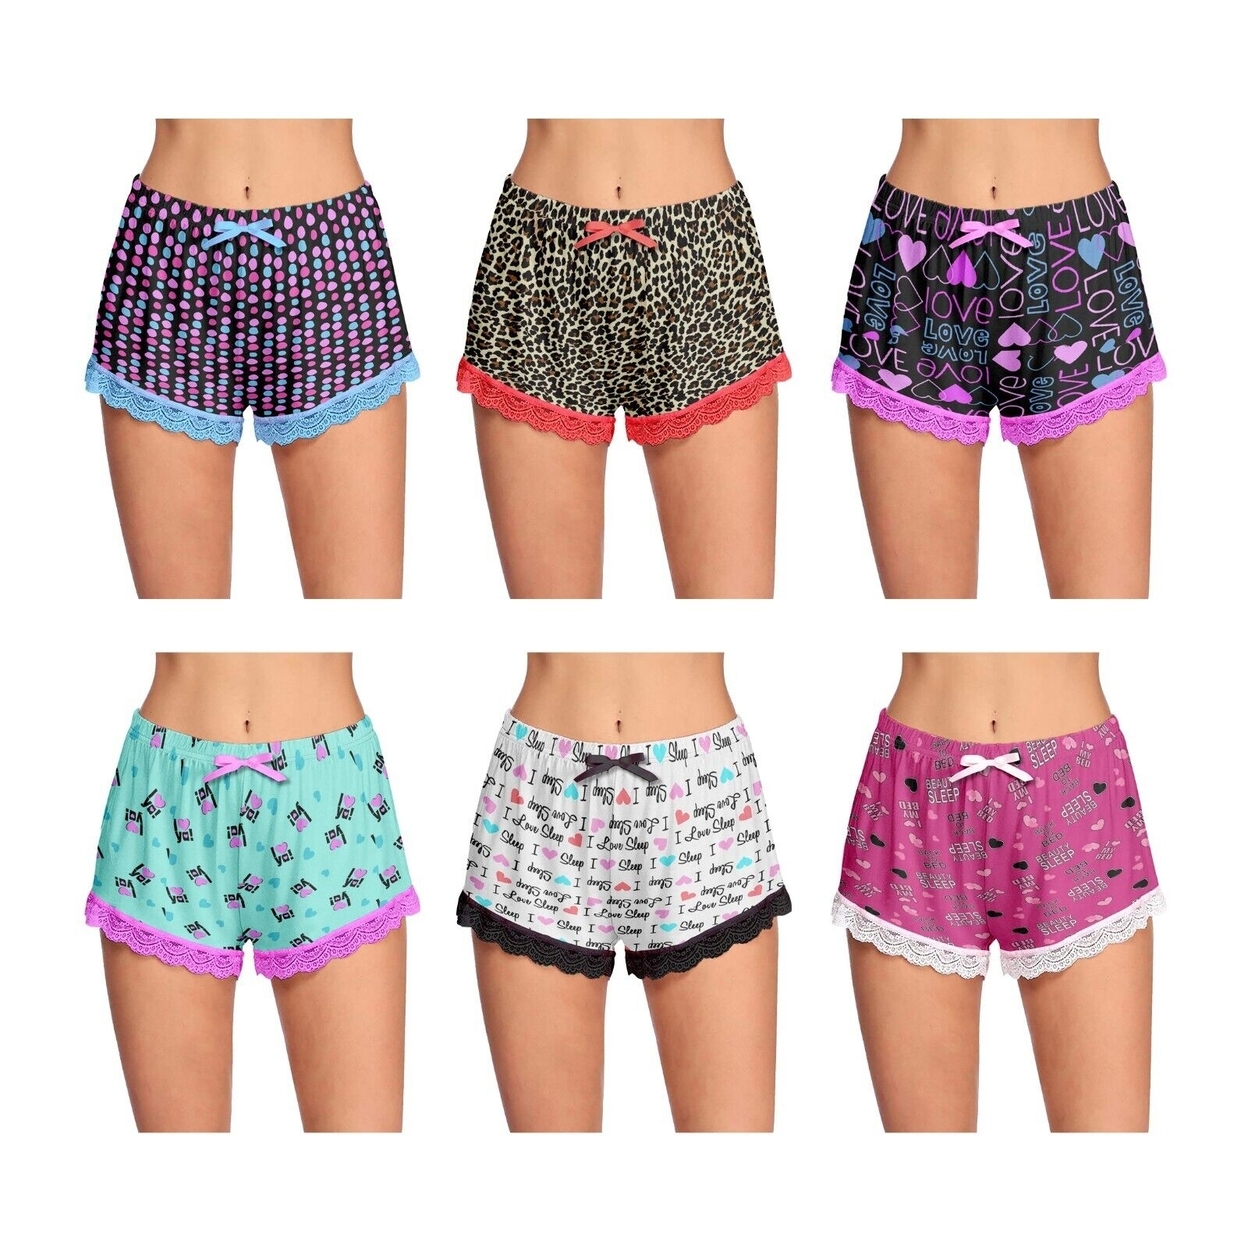 Multi-Pack: Women's Ultra-Soft Cozy Fun Printed Lace Trim Pajama Lounge Shorts - 3-pack, X-large, Shapes